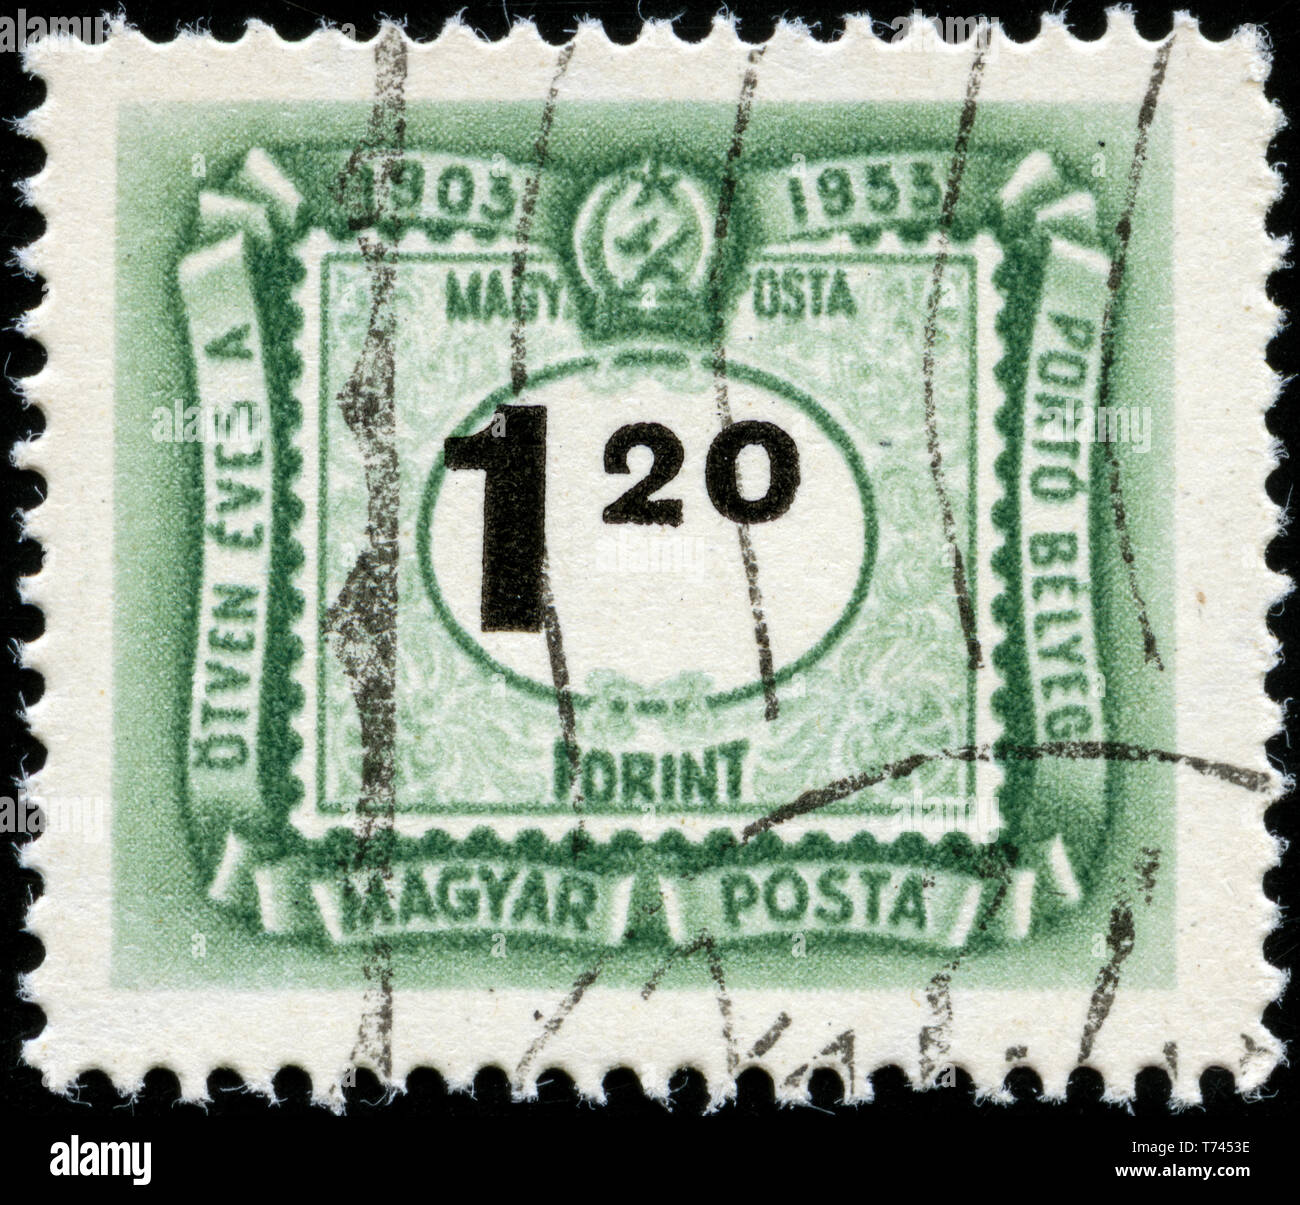 Postage stamp from Hungary in the Postage Due series issued in 1953 Stock Photo